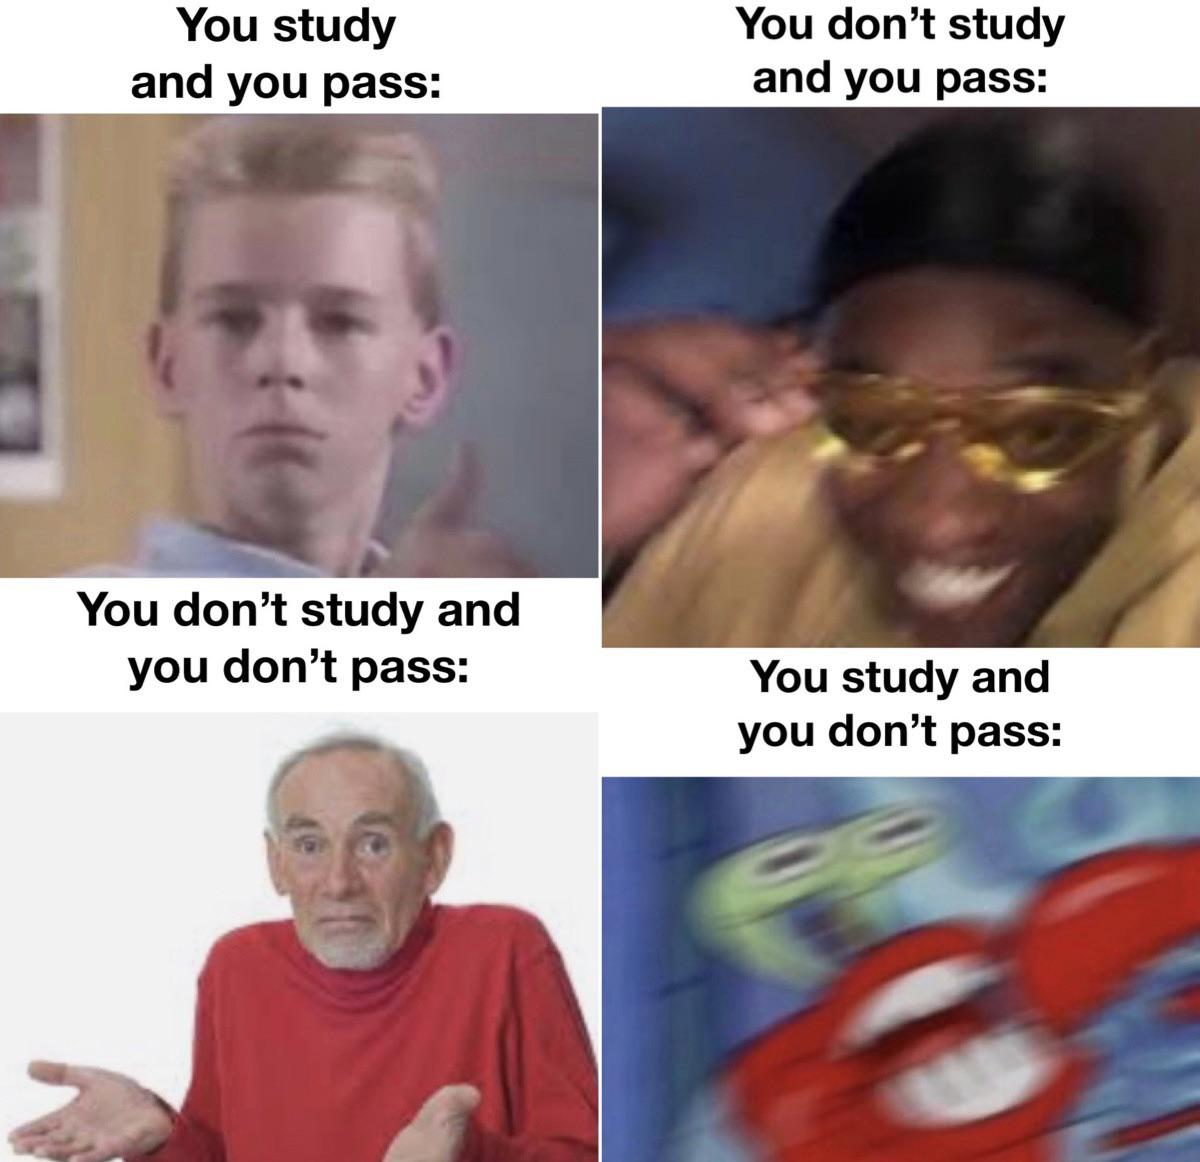 photo caption - You study and you pass You don't study and you pass You don't study and you don't pass You study and you don't pass